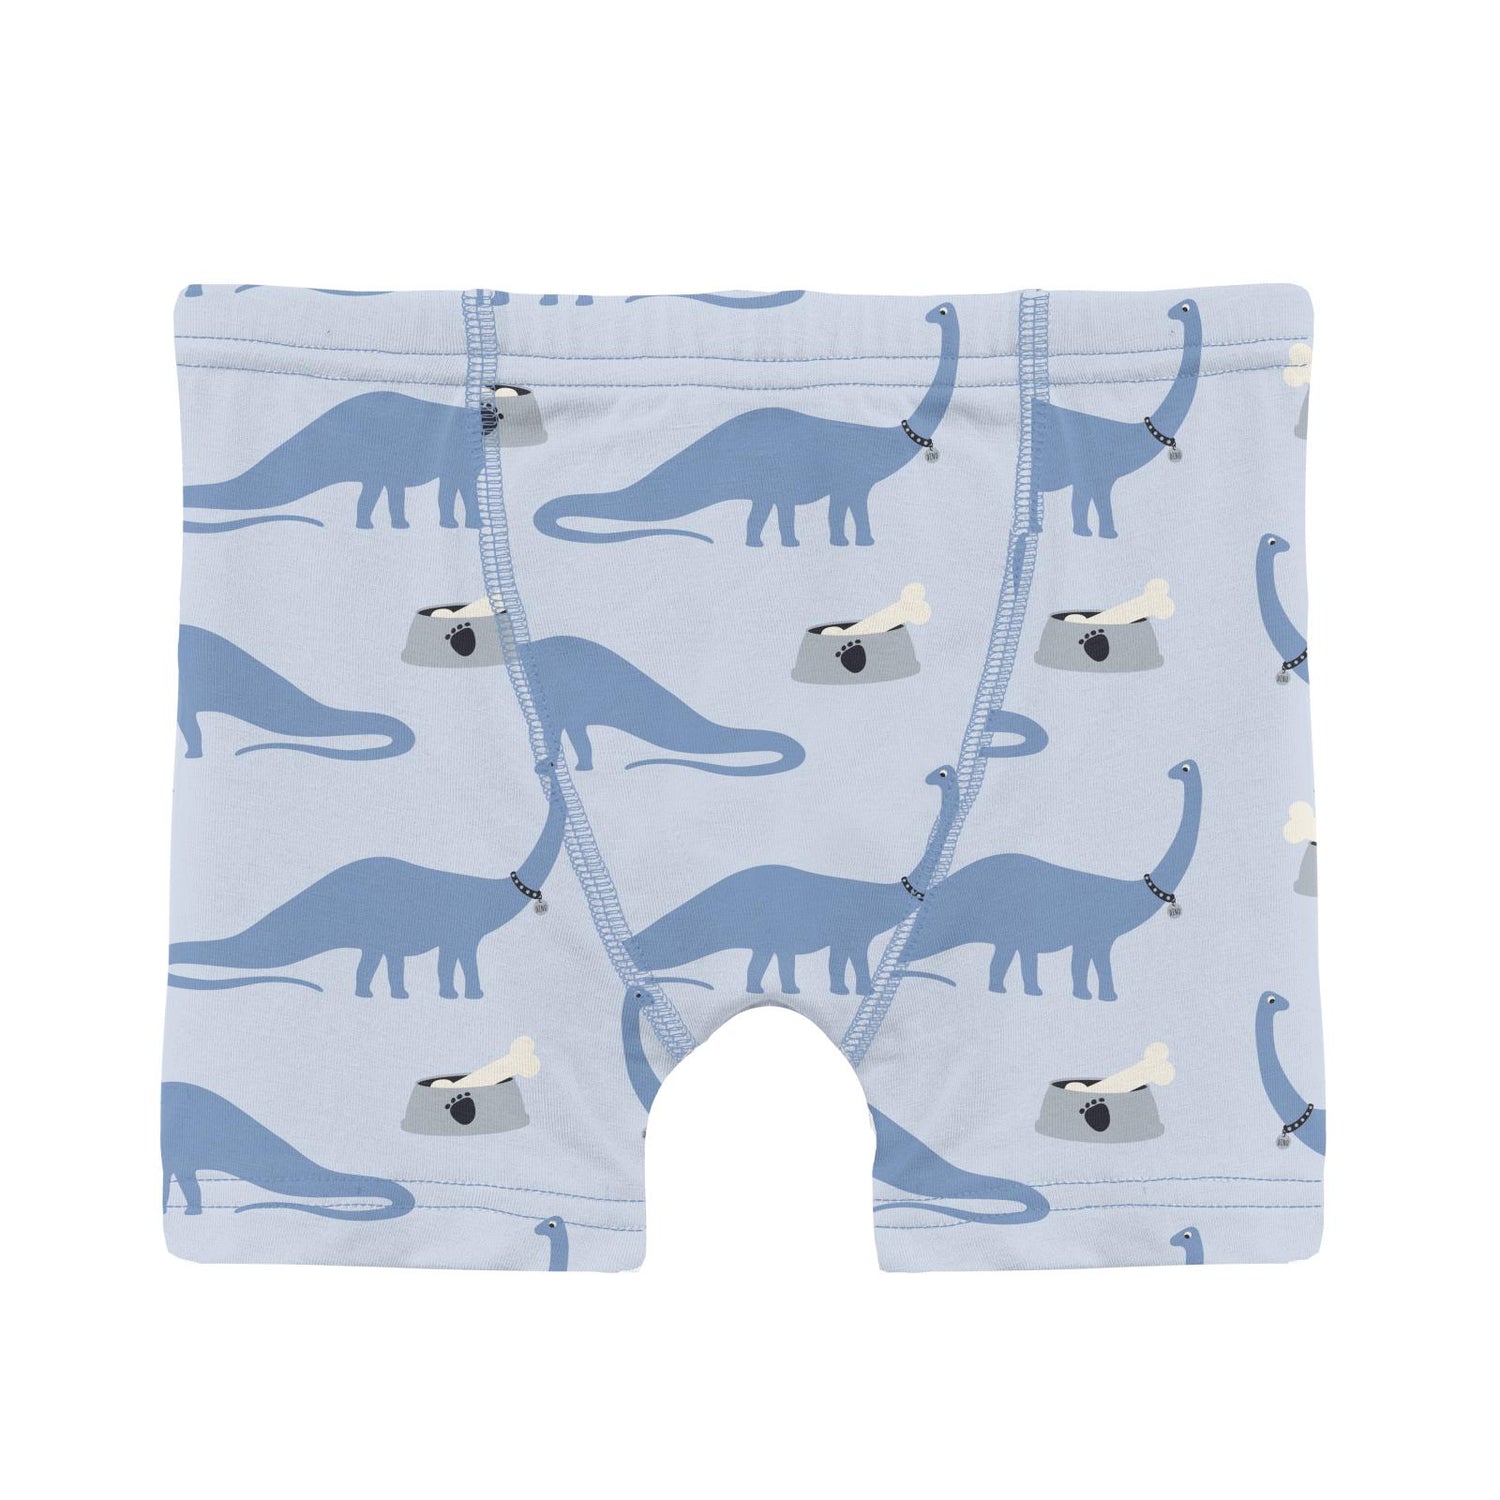 Print Boxer Brief Set of 3 in Pearl Blue Itsy Bitsy Spider, Deep Space & Dew Pet Dino